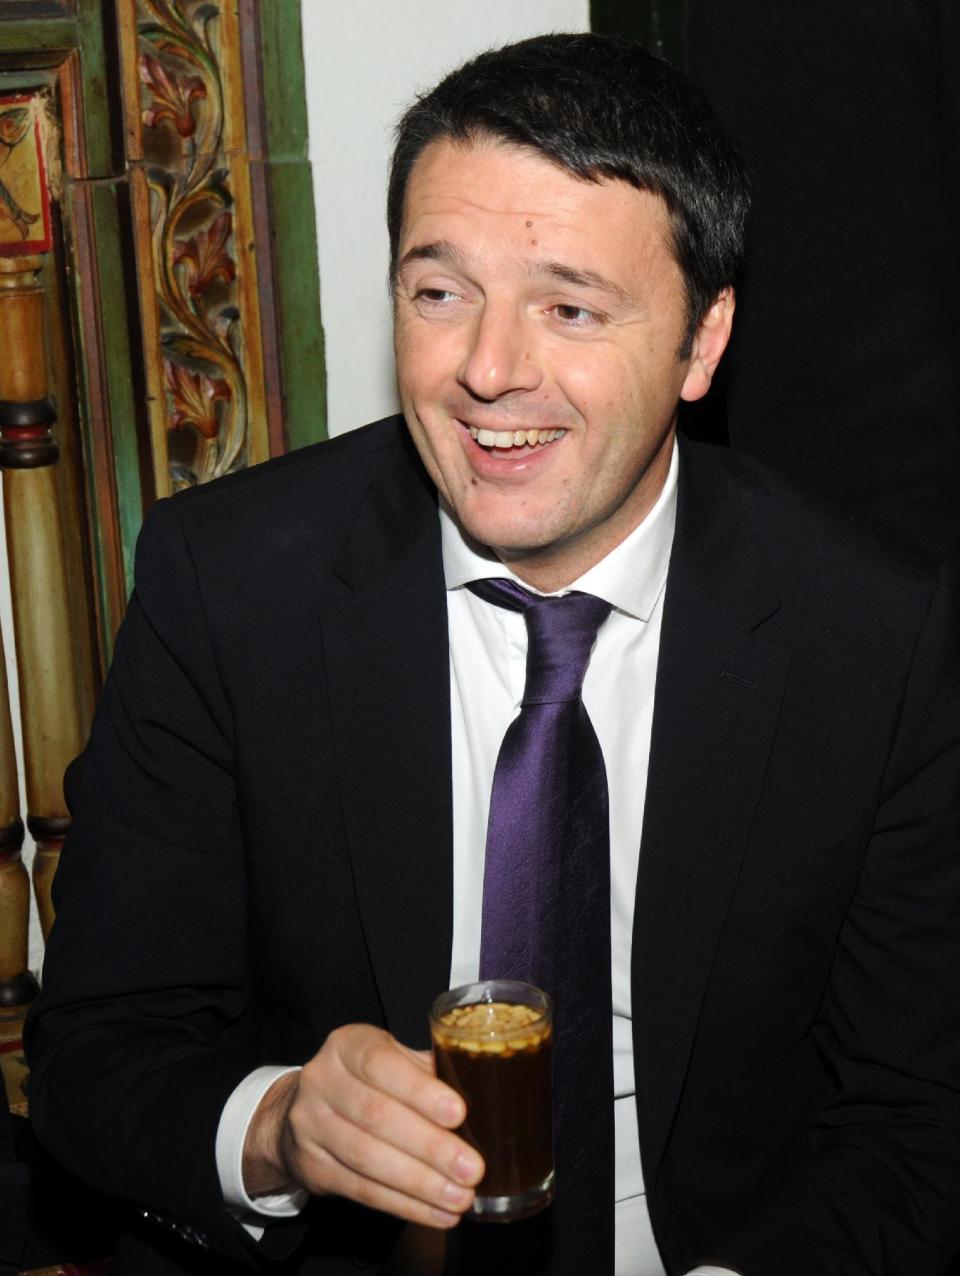 Italian Premier, Matteo Renzi , enjoys a glass of tea with pine nuts during a meeting with members of the Tunisian civil society at the cafe des Nattes in Sidi Bou Said, north of the Tunisian capital Tunis, Tuesday, March 4, 2014. Earlier in the day Renzi had met the Tunisian President, Moncef Marzouki, and his Tunisian counterpart, Mehdi Jomaa. (AP Photo/Hamadi Ben Taieb)